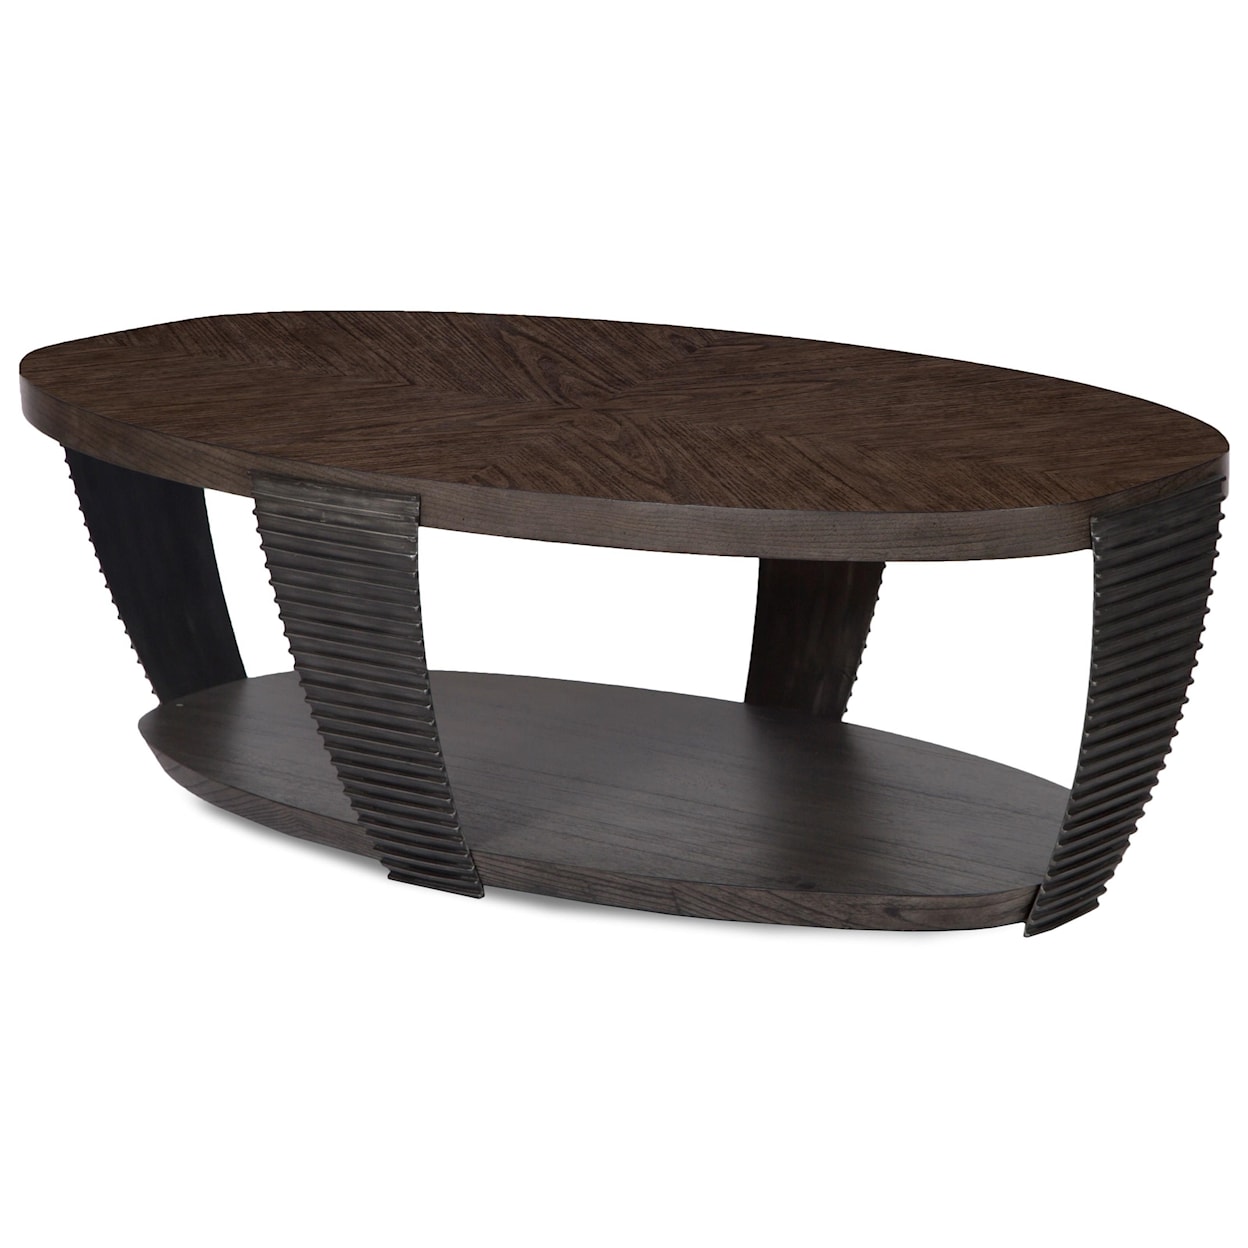 Magnussen Home Kendrick Oval Cocktail Table